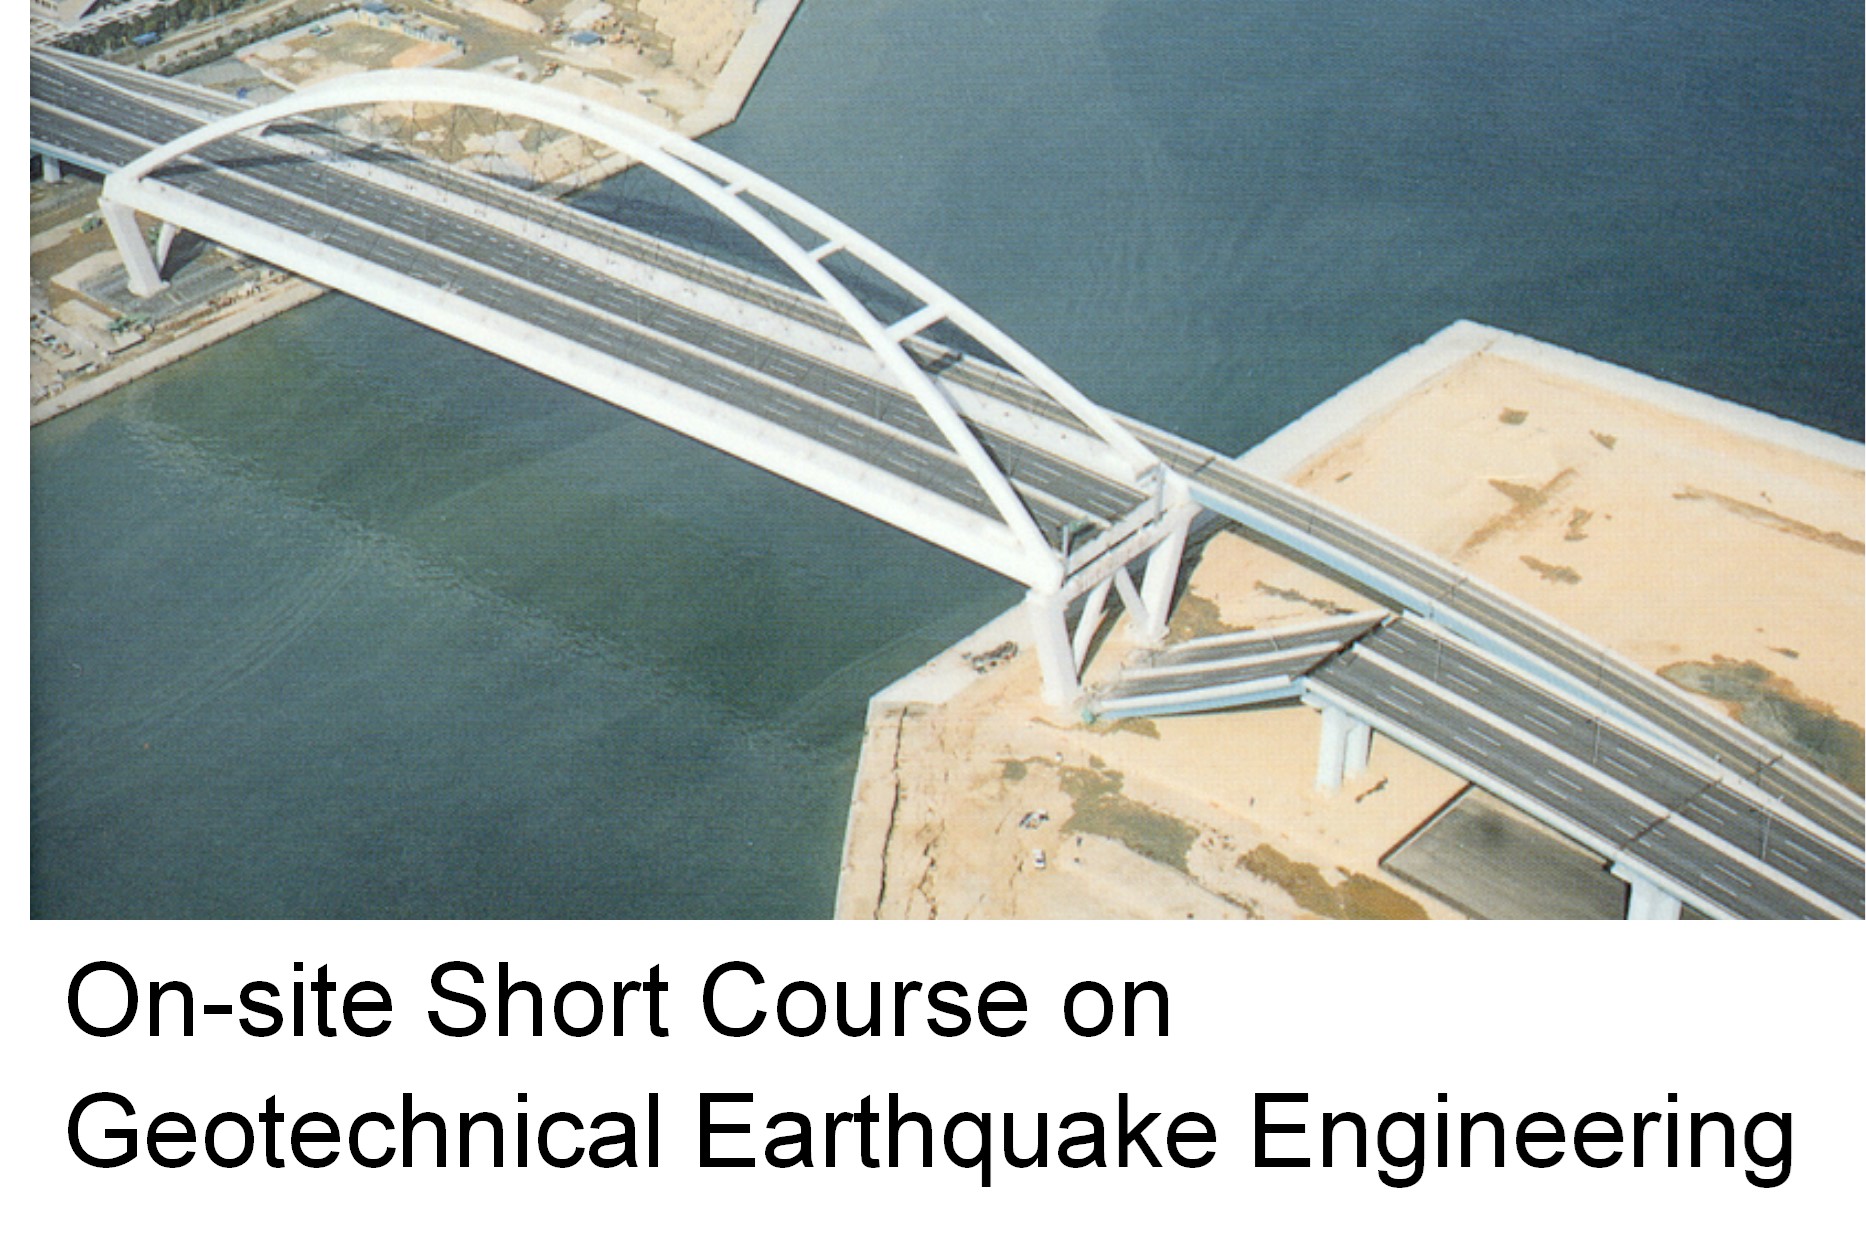 On-site Short Course on Geotechnical Earthquake Engineering